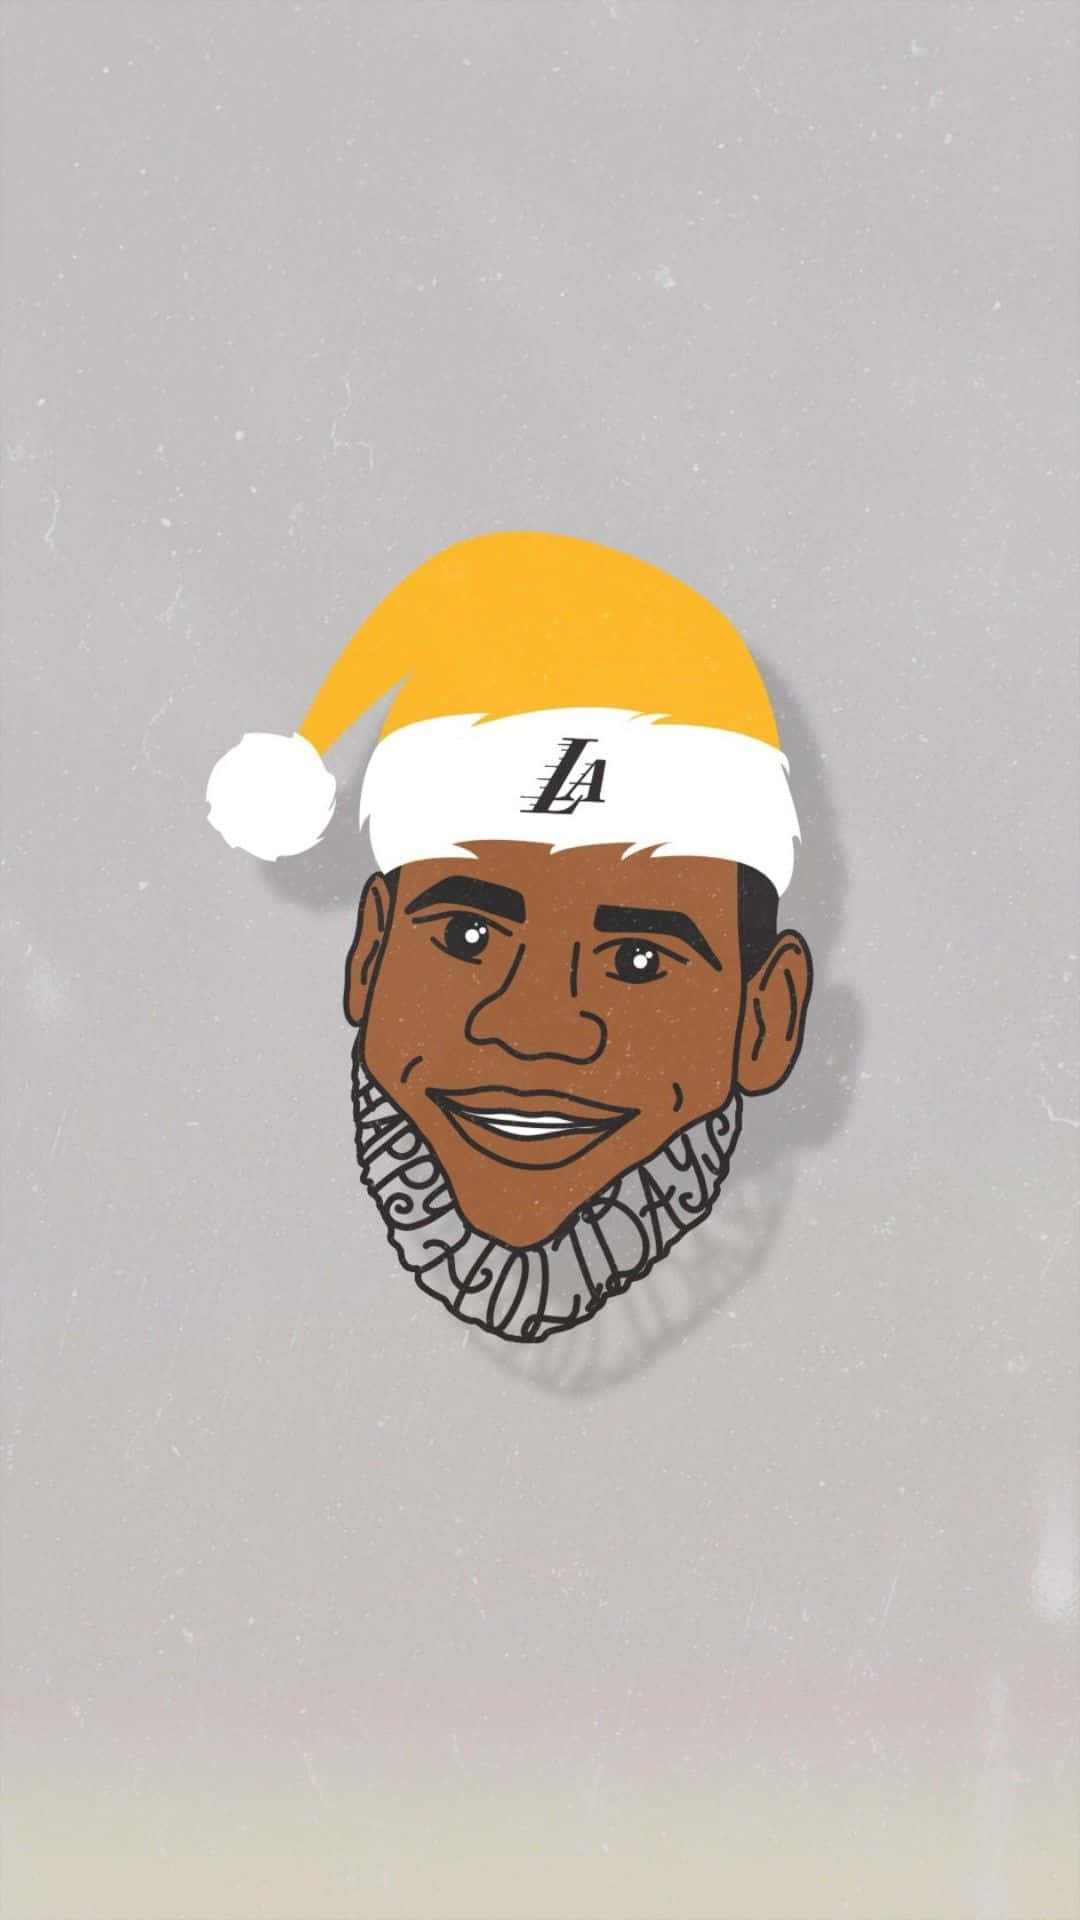 Christmas time just got more exciting in the NBA! Wallpaper